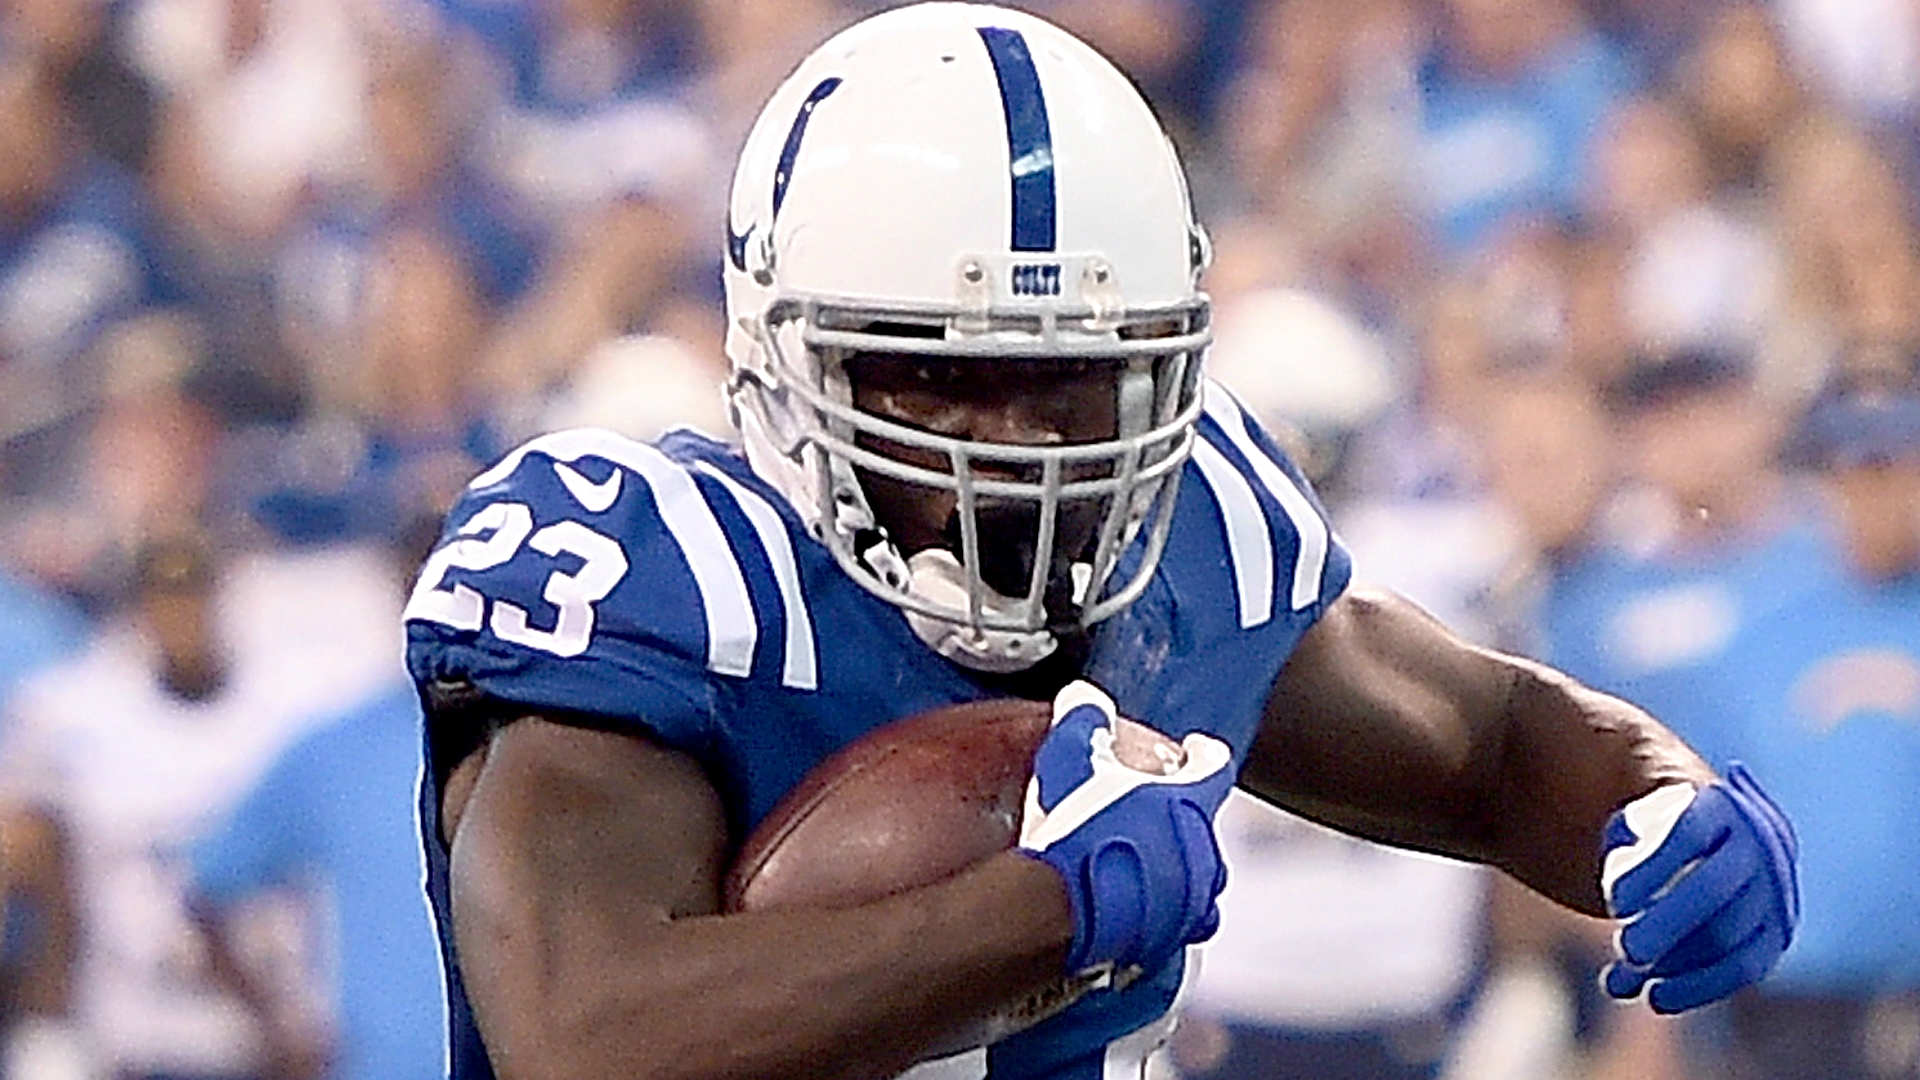 Frank Gore runs past Jim Brown in the record books. NFL